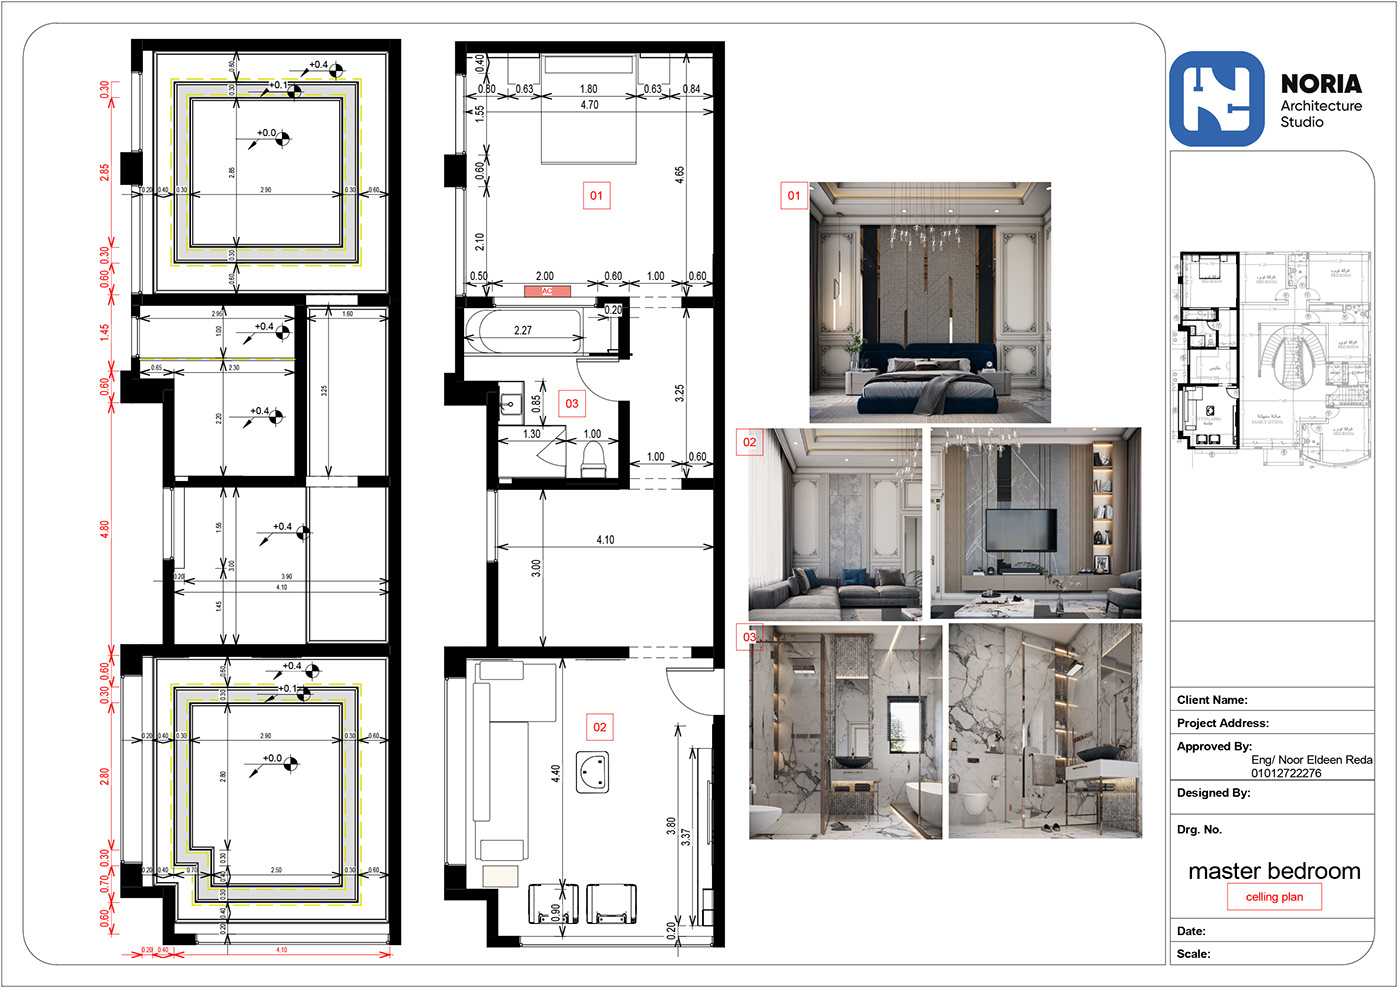 shop drawing working drawings AutoCAD architecture master bedroom luxury shopdrawing technical shop Drawing Design shop drawing details